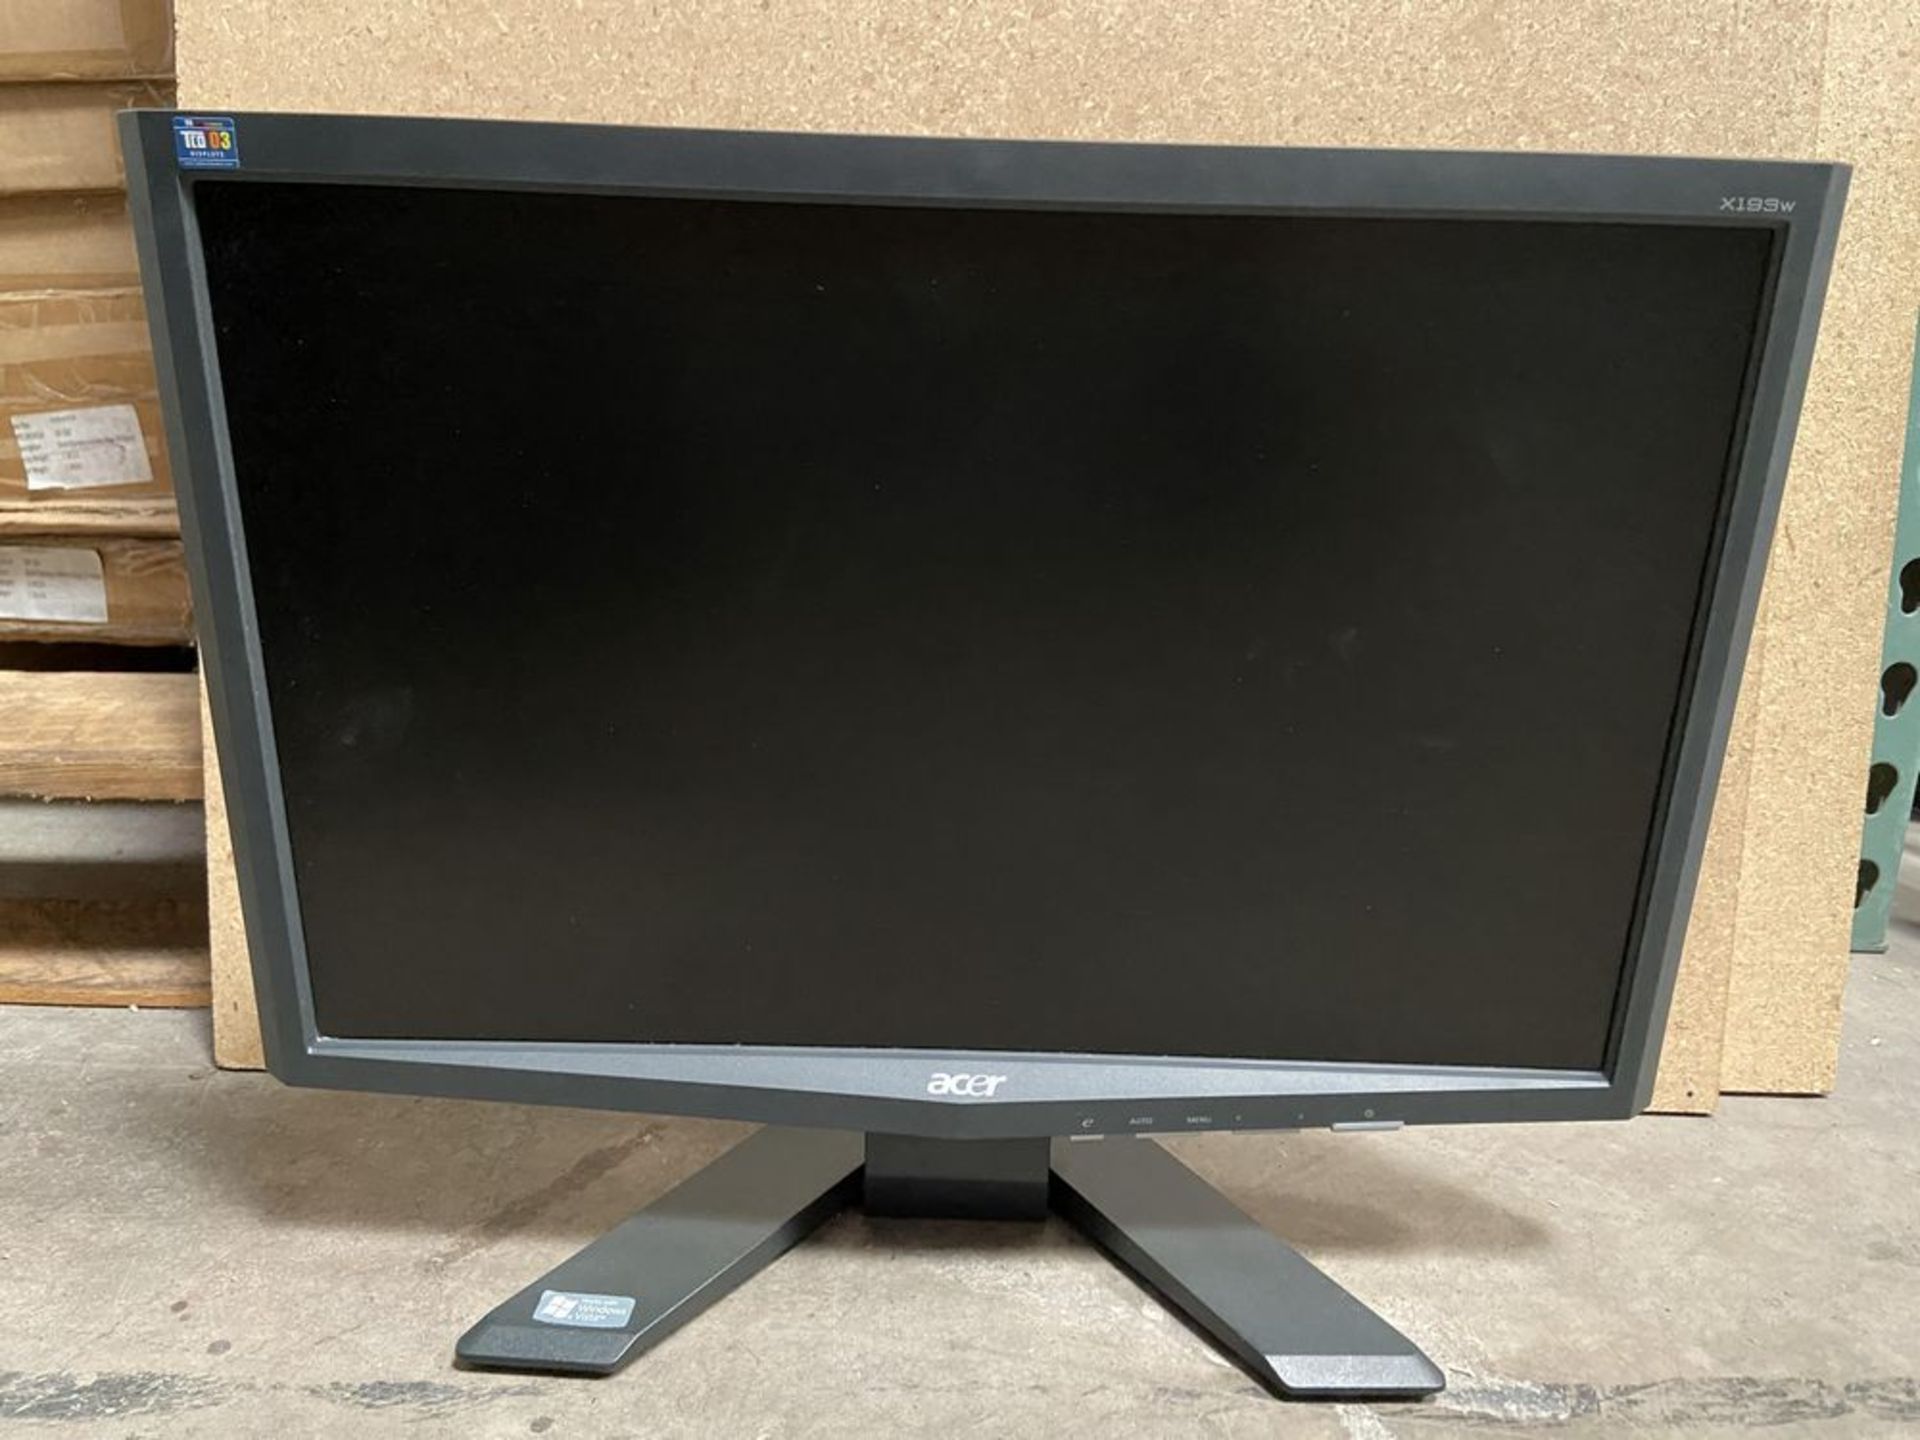 Acer x193w Monitor